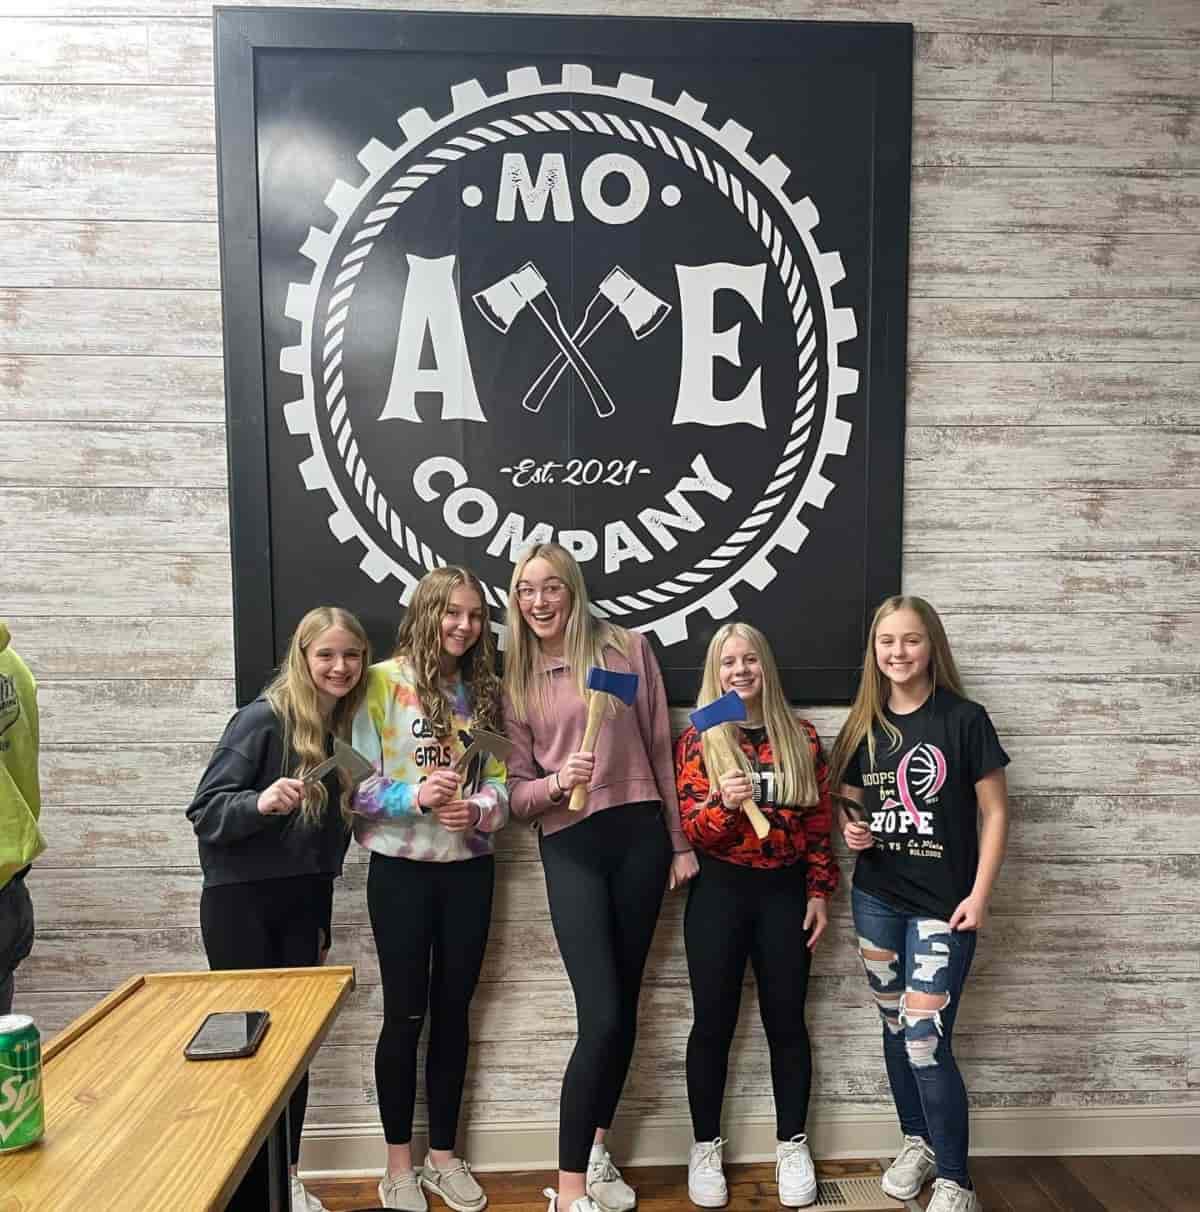 moberly girls night out axe throwing